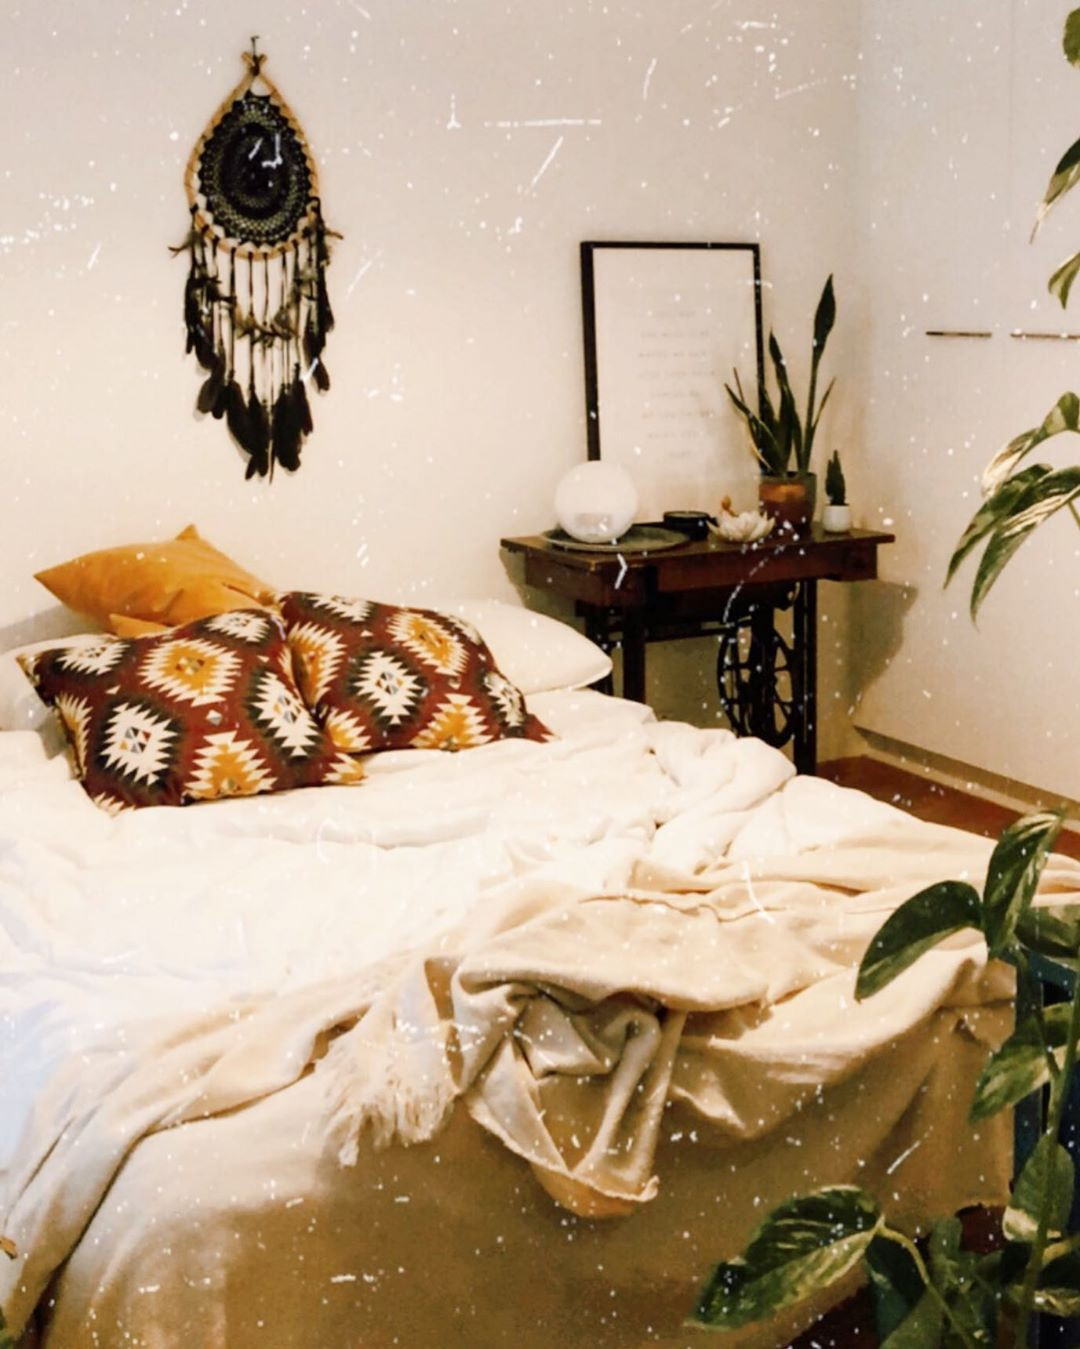 56 of The Best Bohemian Style Bedrooms,bohemian bedroom ideas on a budget,romantic bohemian bedroom